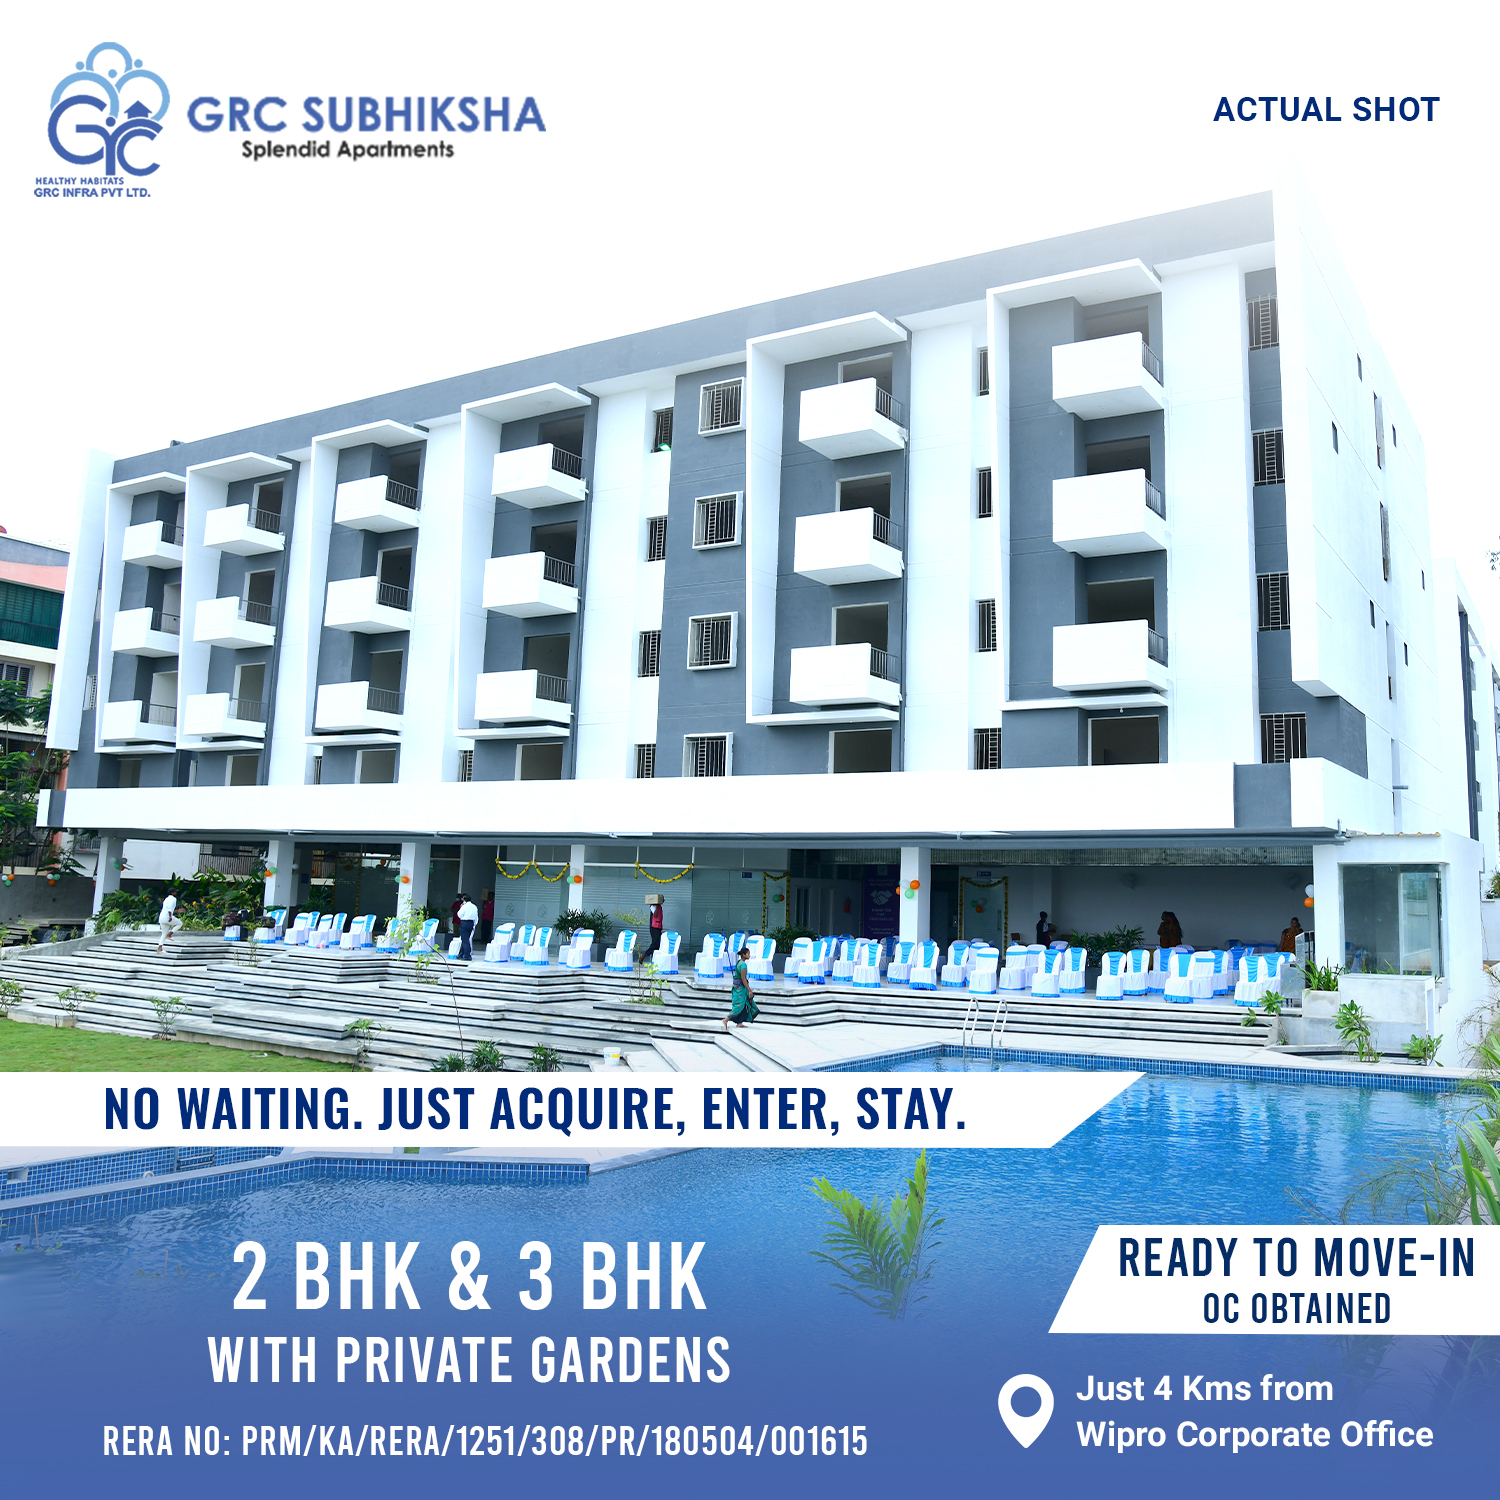 GRC Subiksha Get 3 BHK and 2 BHK Flats for Sale in Sarjapur Road Bangalore World Class Amenities Excellent Connectivity Ready to Move Credai Bangalore